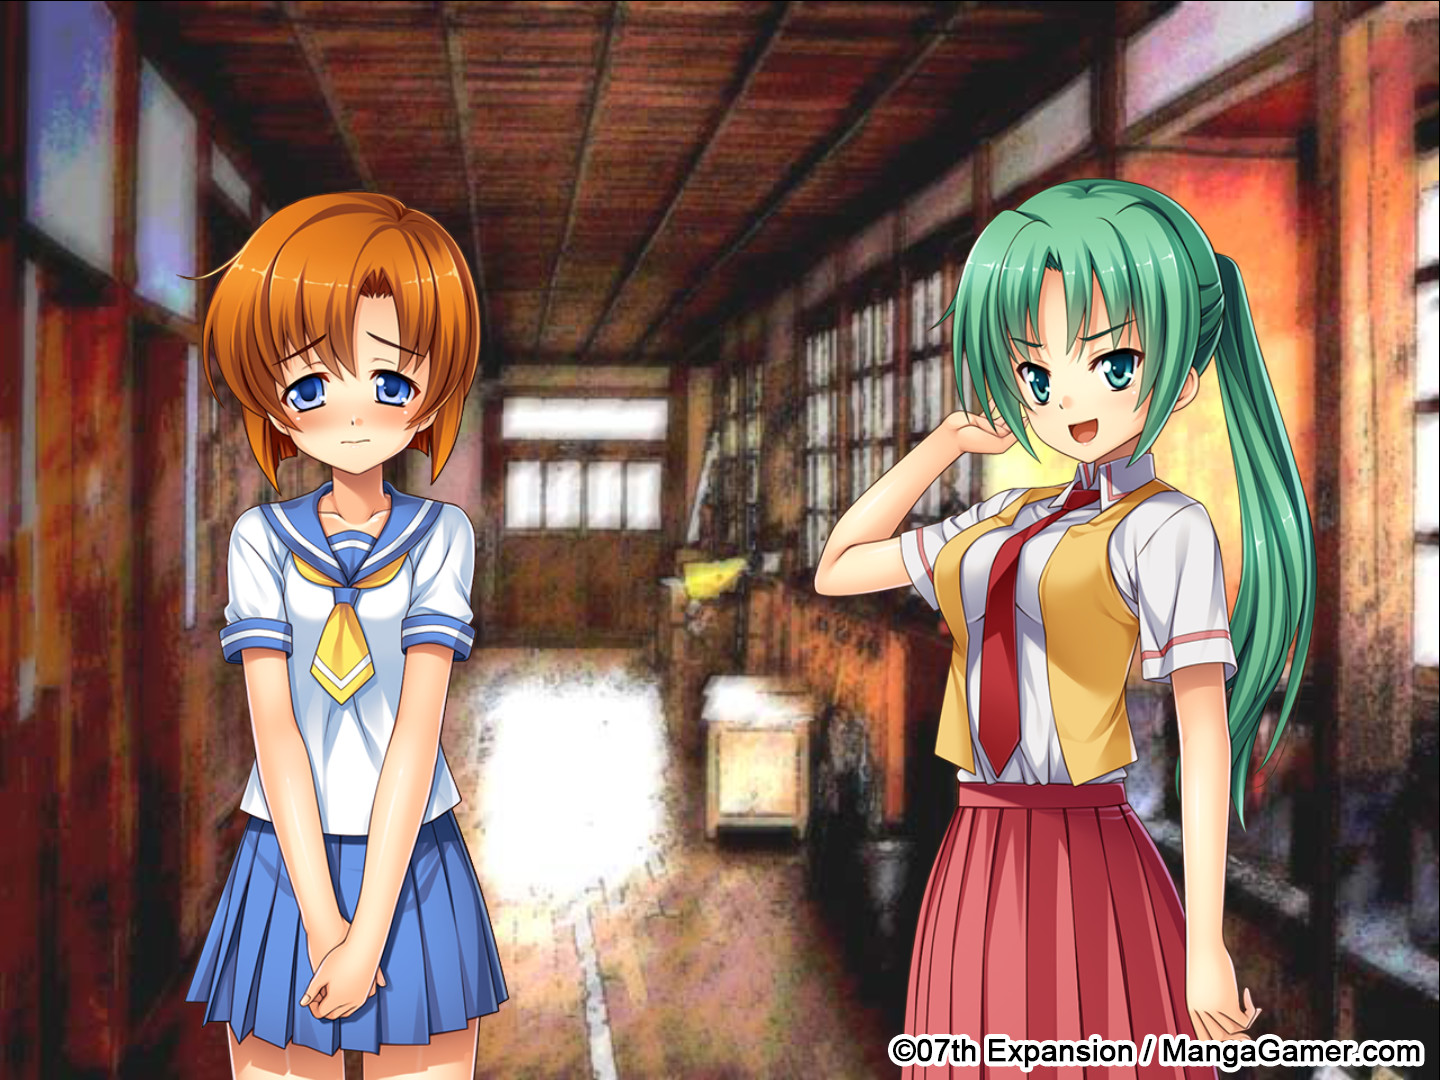 The Man s Game Chapter 1 Higurashi When They Cry Hou - Ch.1 Onikakushi on Steam